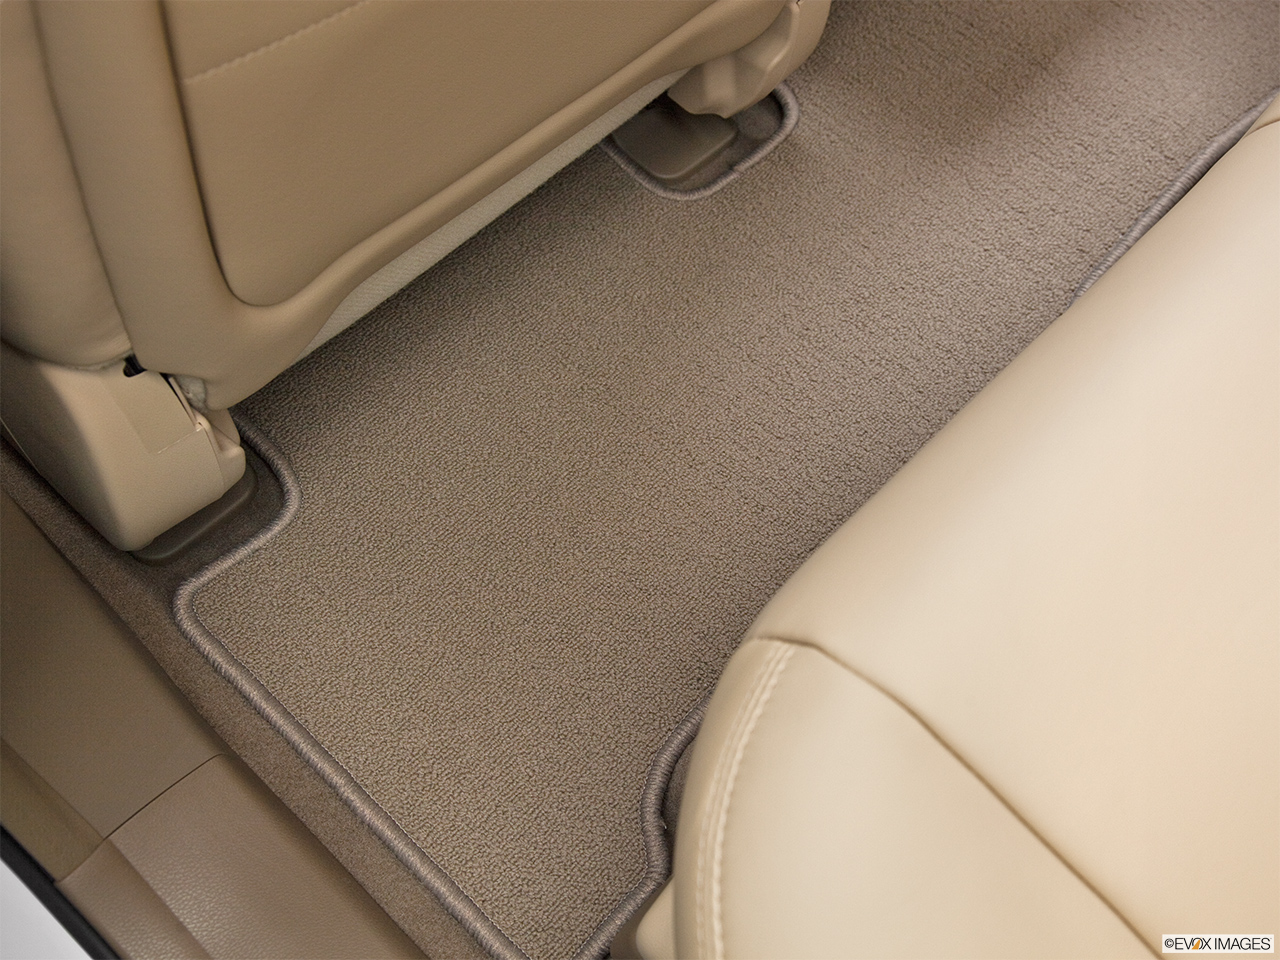 2012 Acura MDX MDX Rear driver's side floor mat. Mid-seat level from outside looking in. 